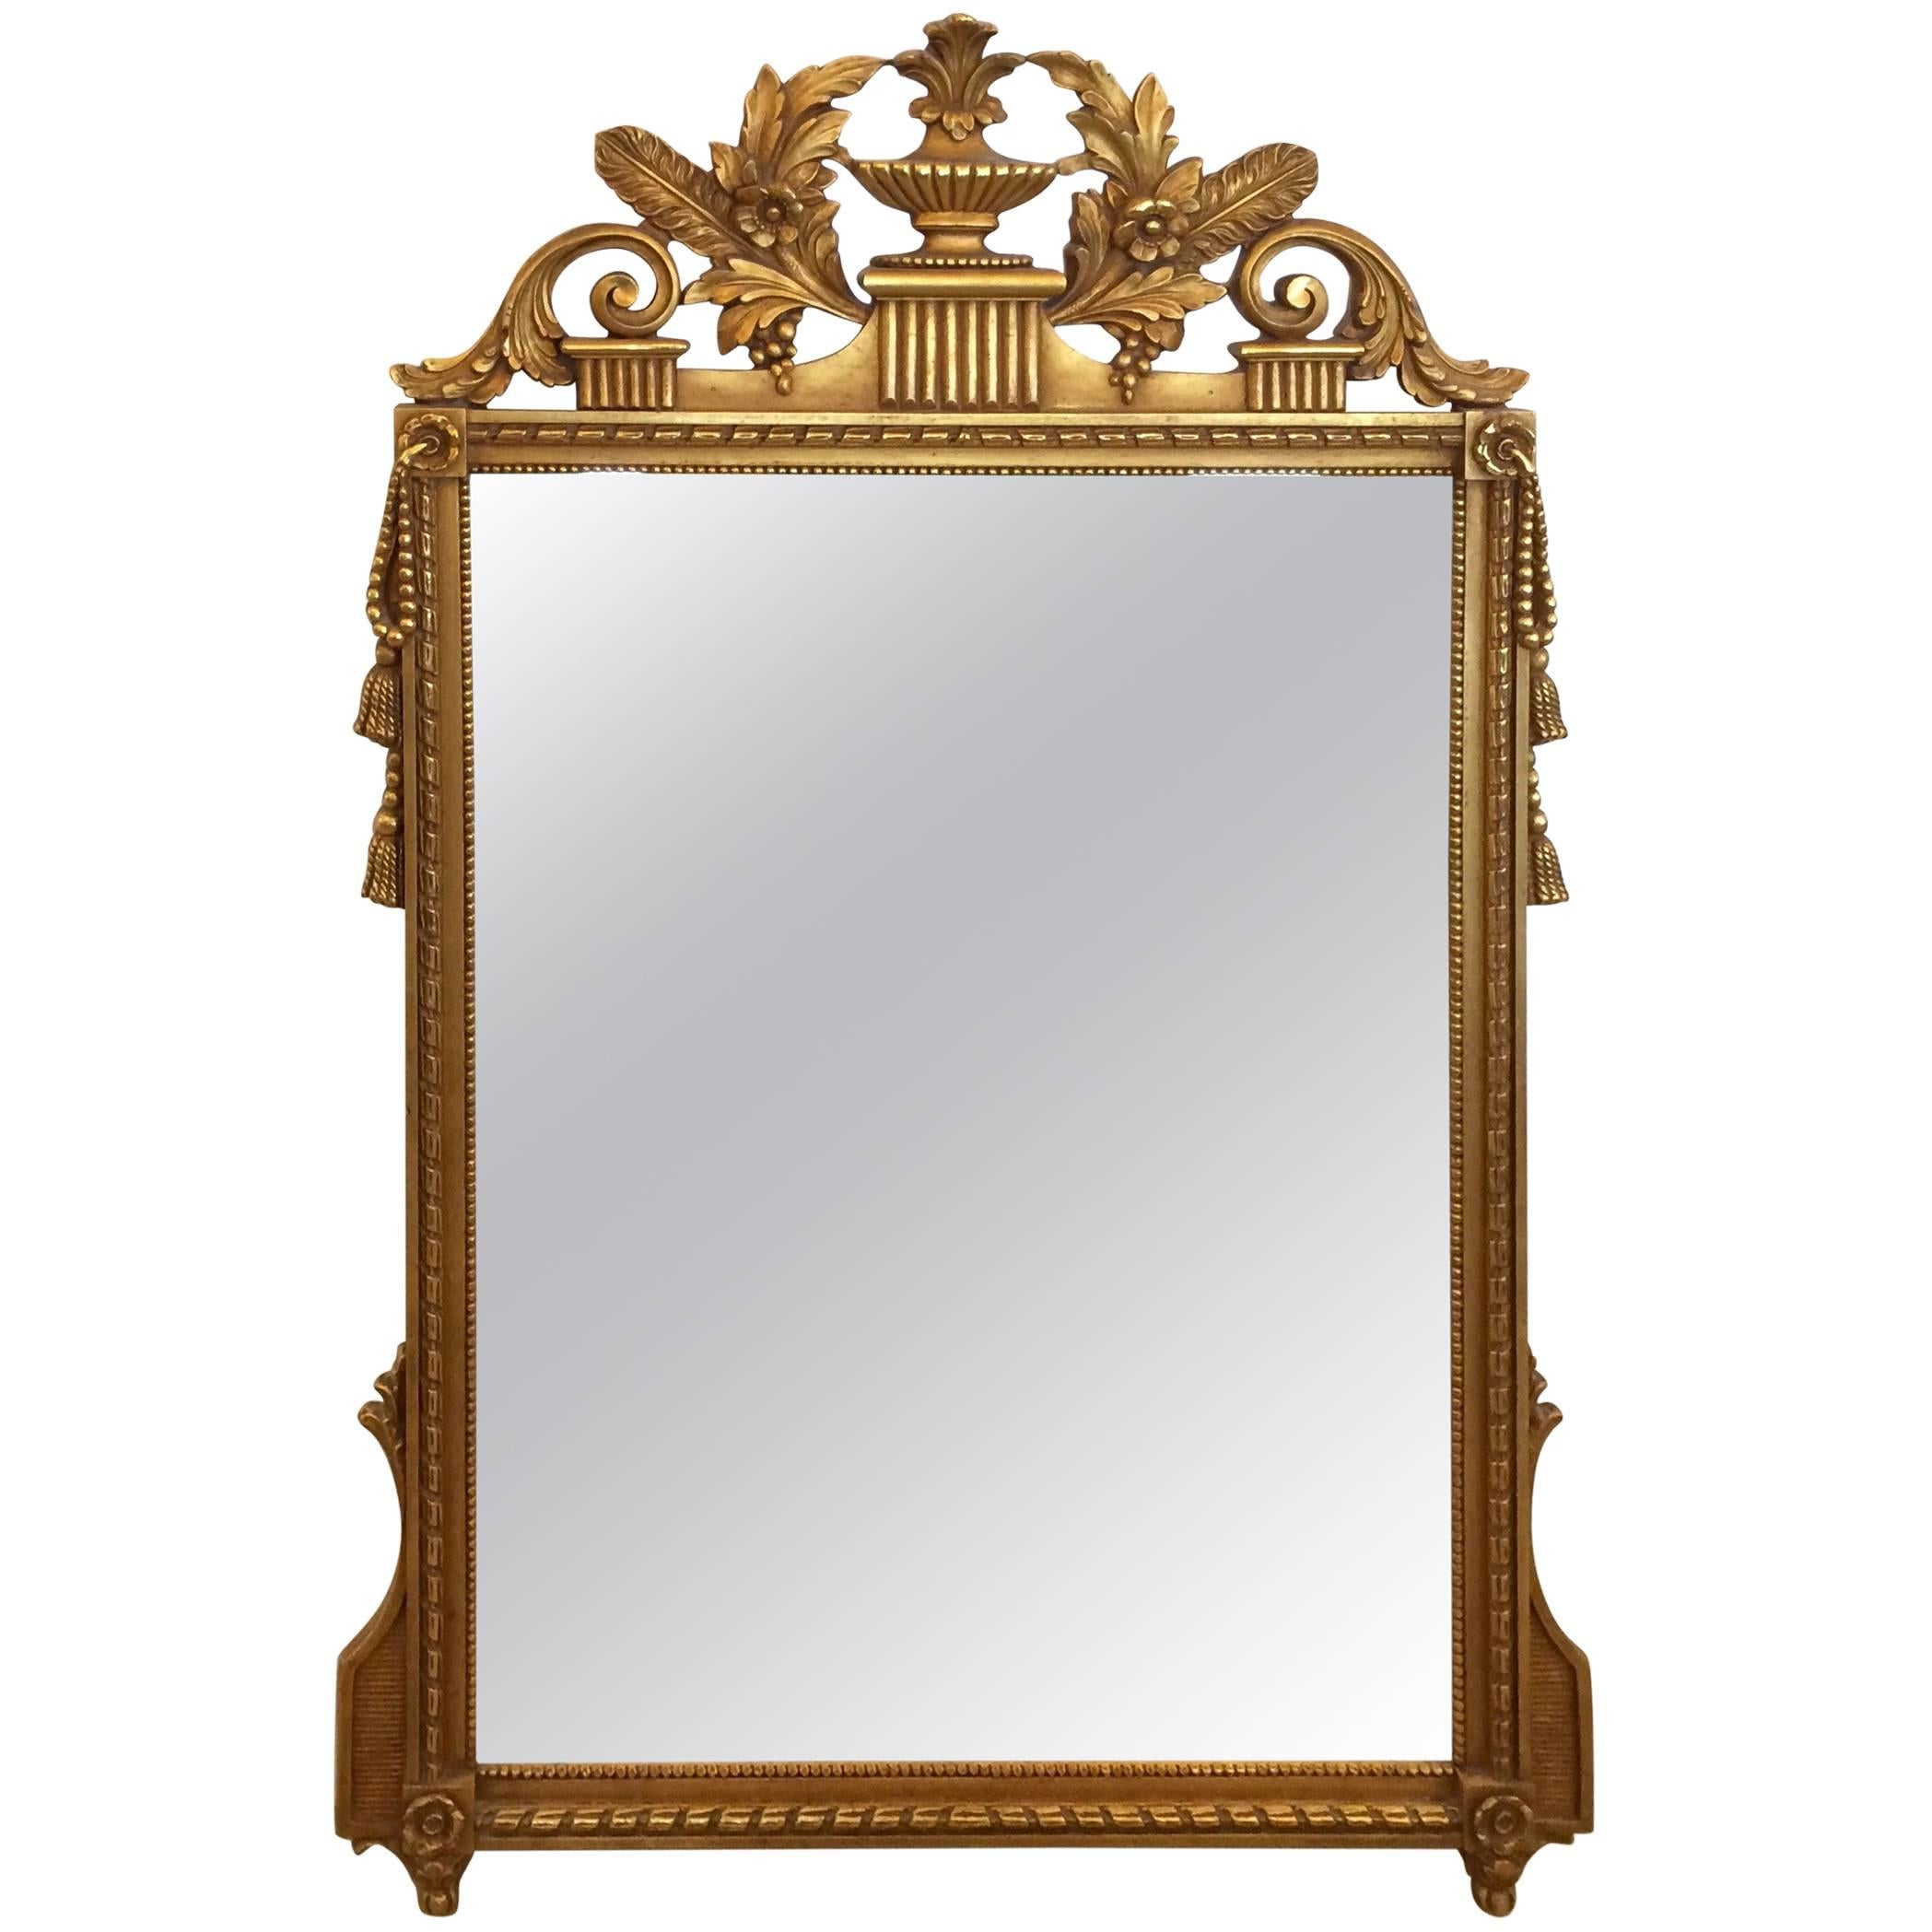 Classic Neoclassical Gilded Mirror